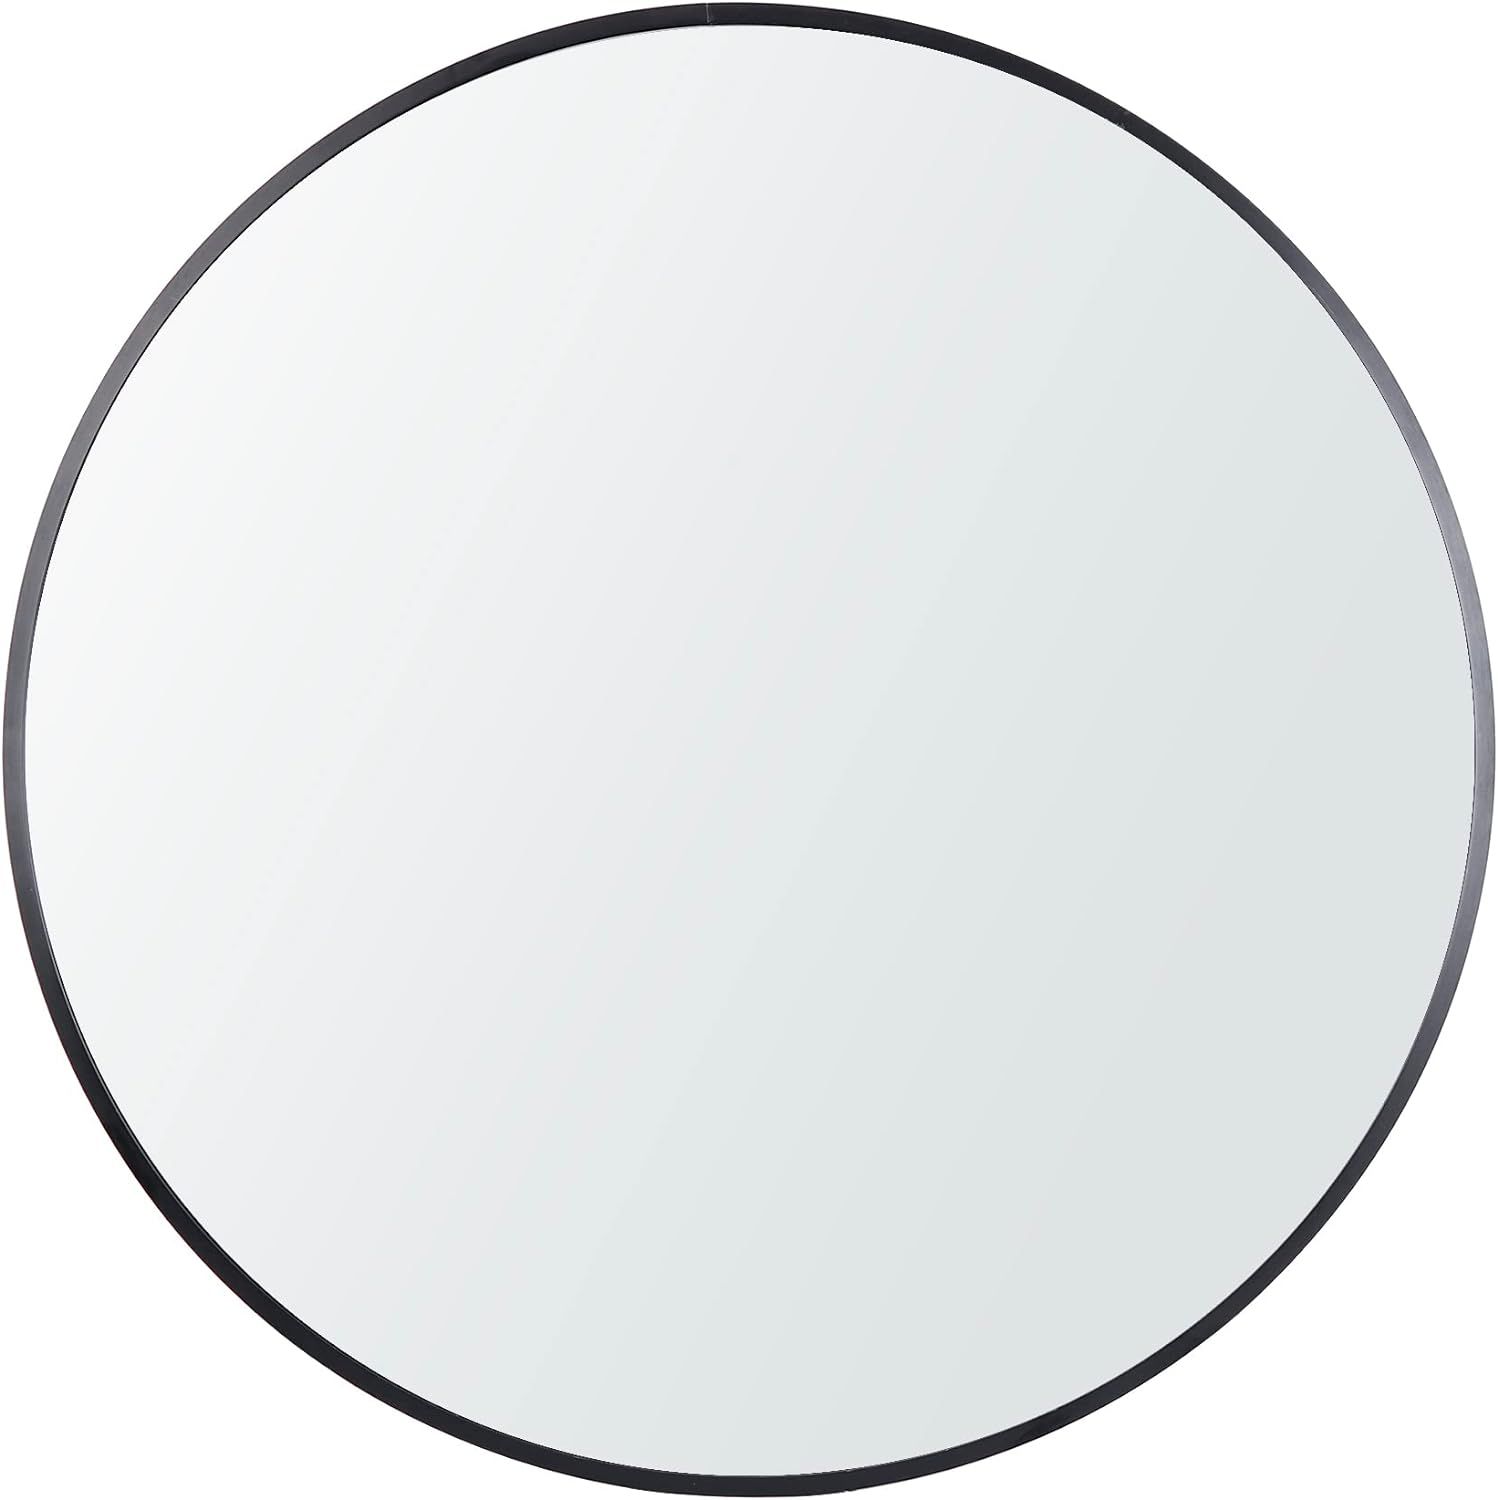 Smartxchoices Pack of 2 Black Round Mirrors 24 Inch, Metal Frame Wall Mounted Circle Mirrors, Van... | Amazon (US)